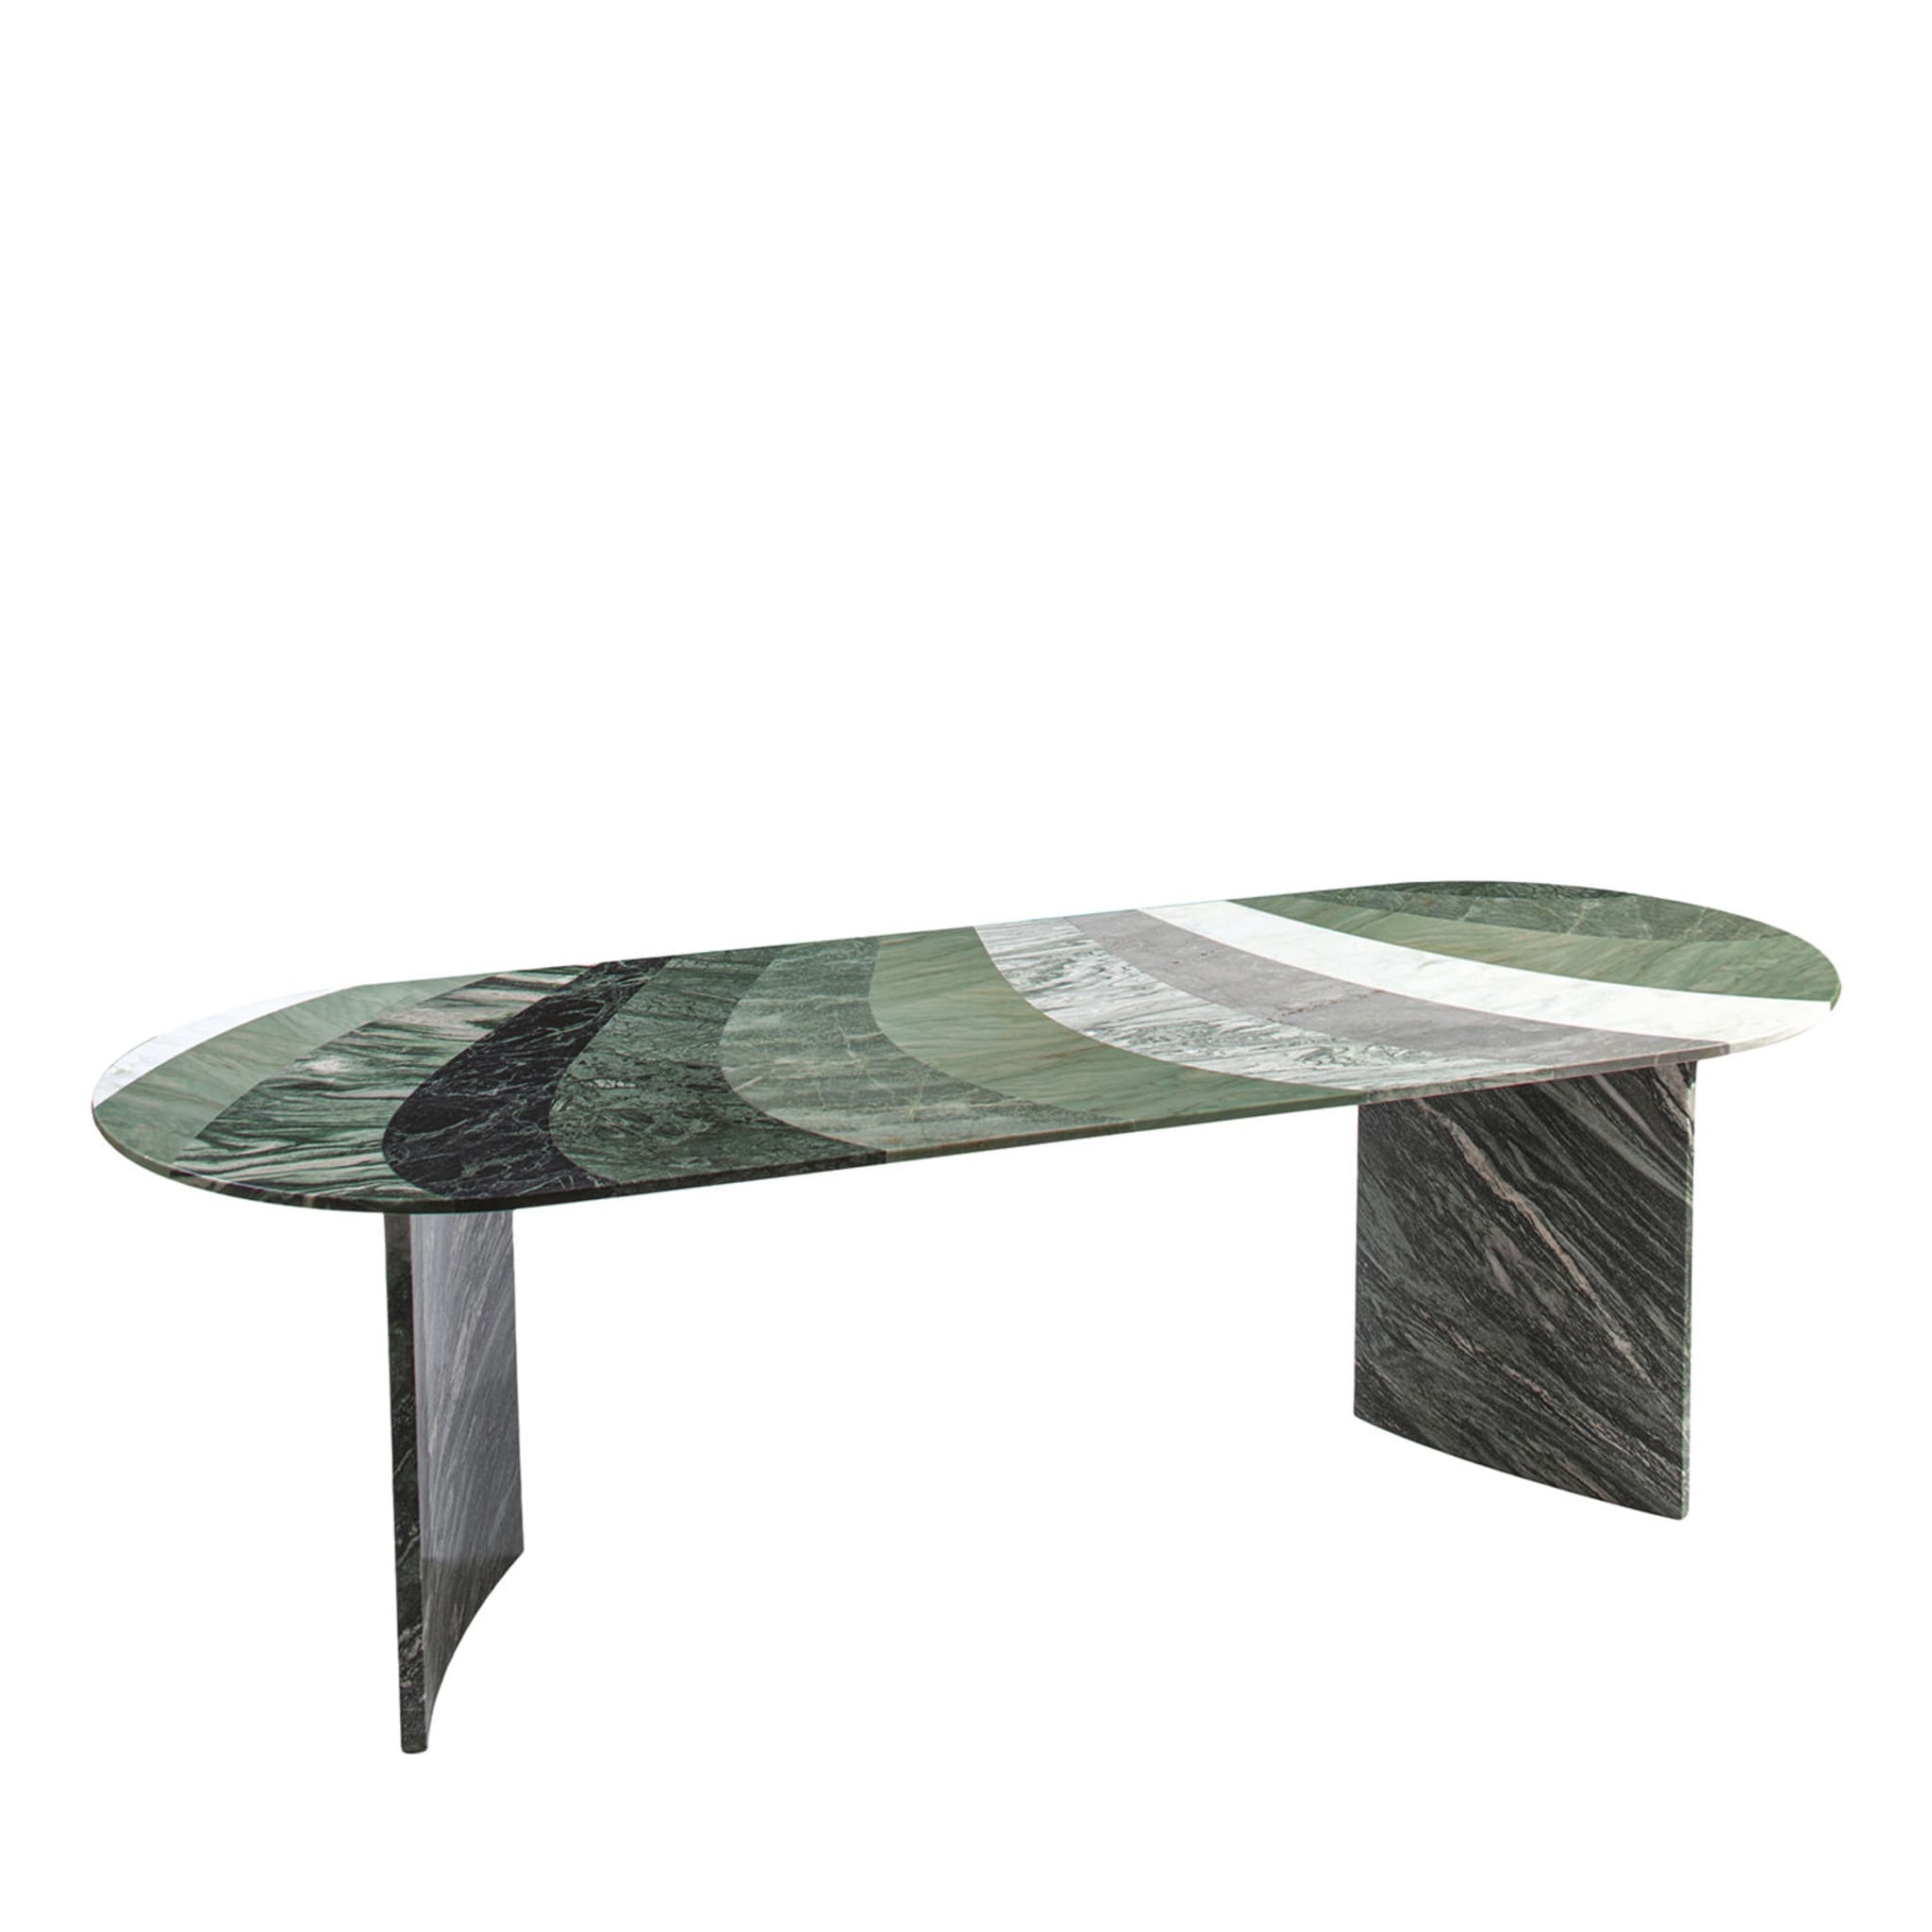 Agua Marea Living Table by Patricia Urquiola - Main view